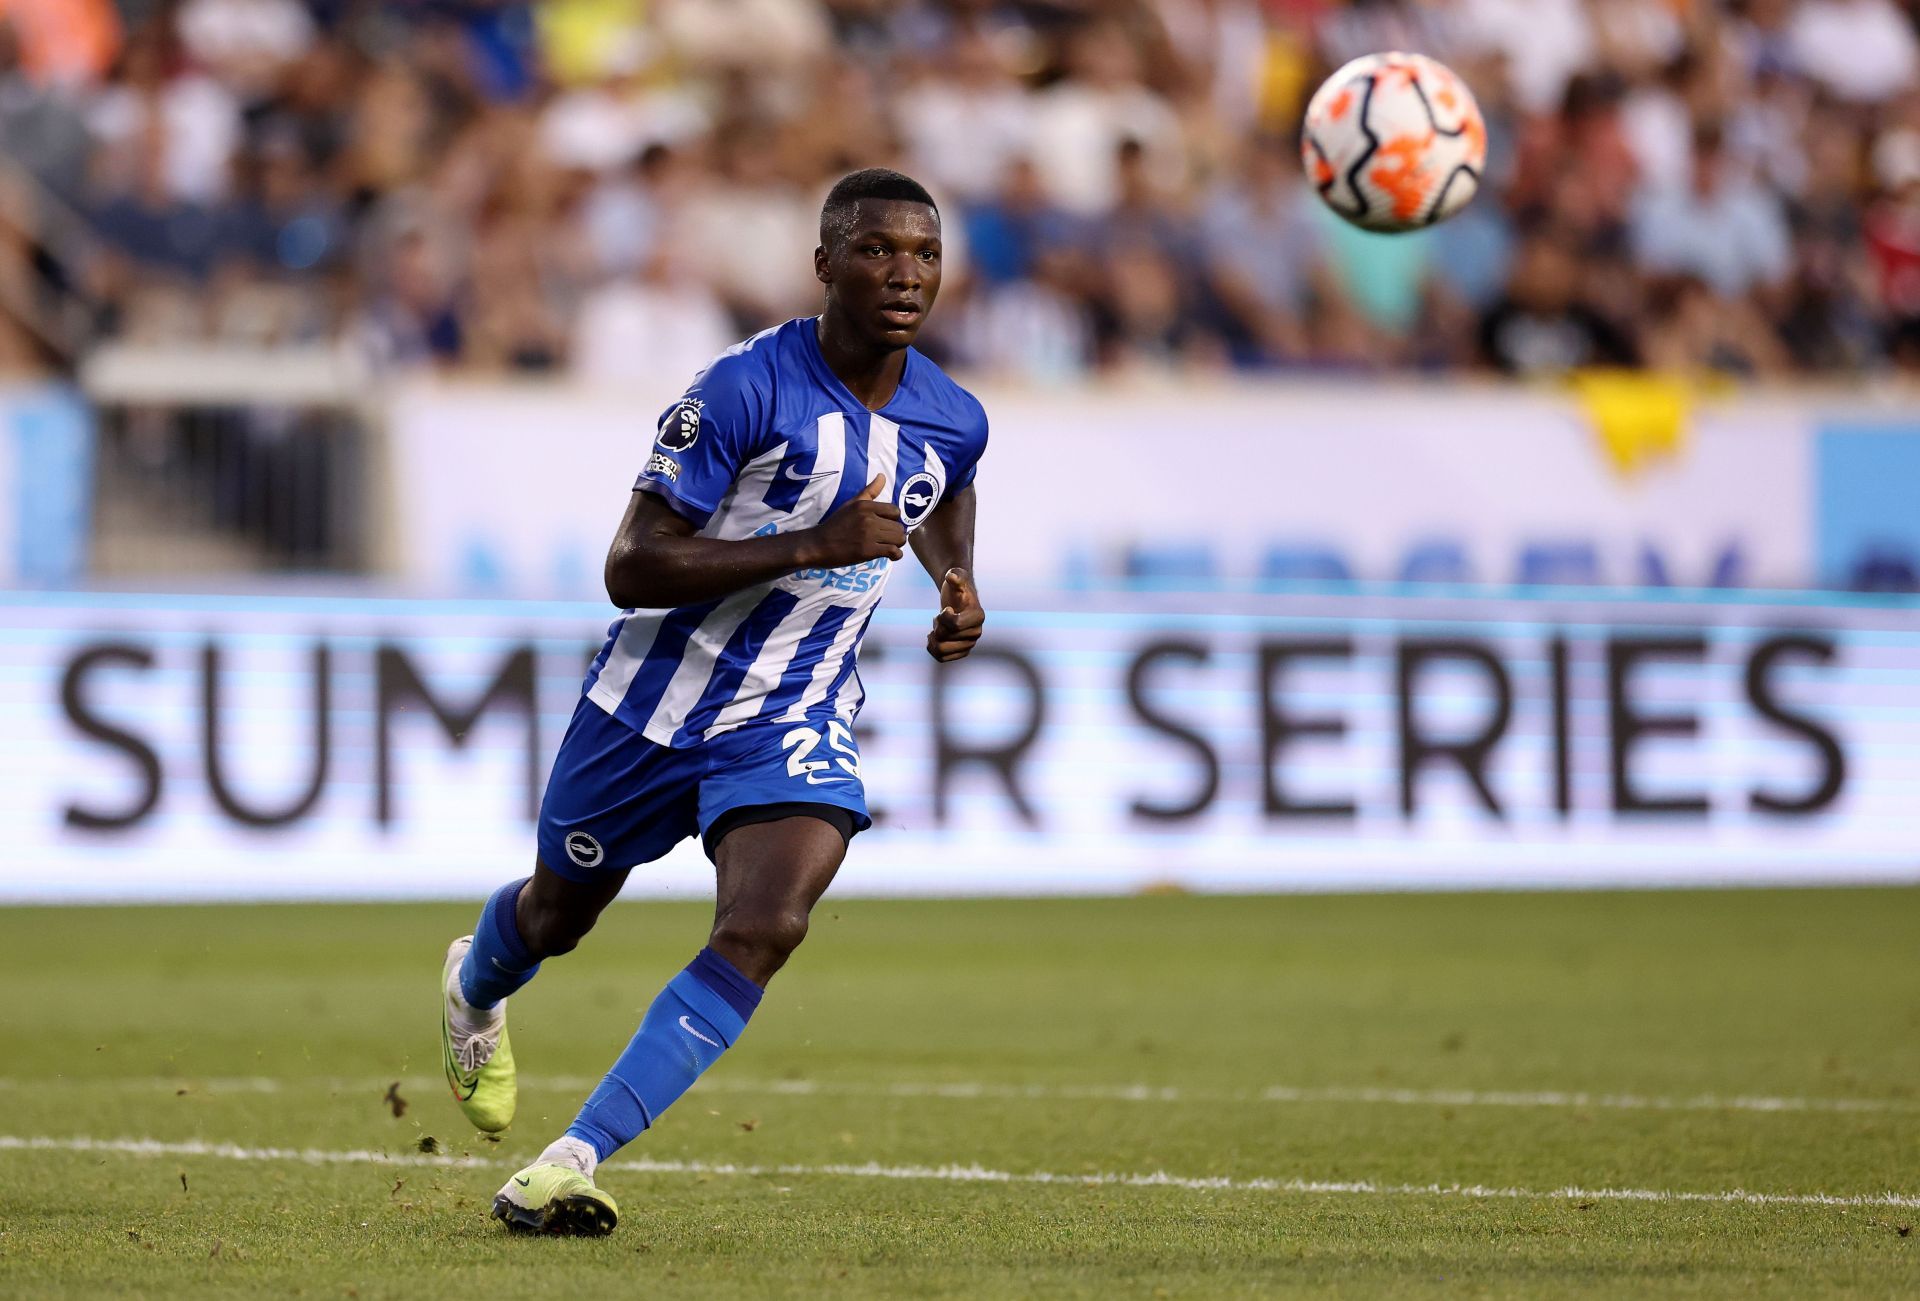 Moises Caicedo in his last game for Brighton against Newcastle United, prior to his move to Chelsea FC.